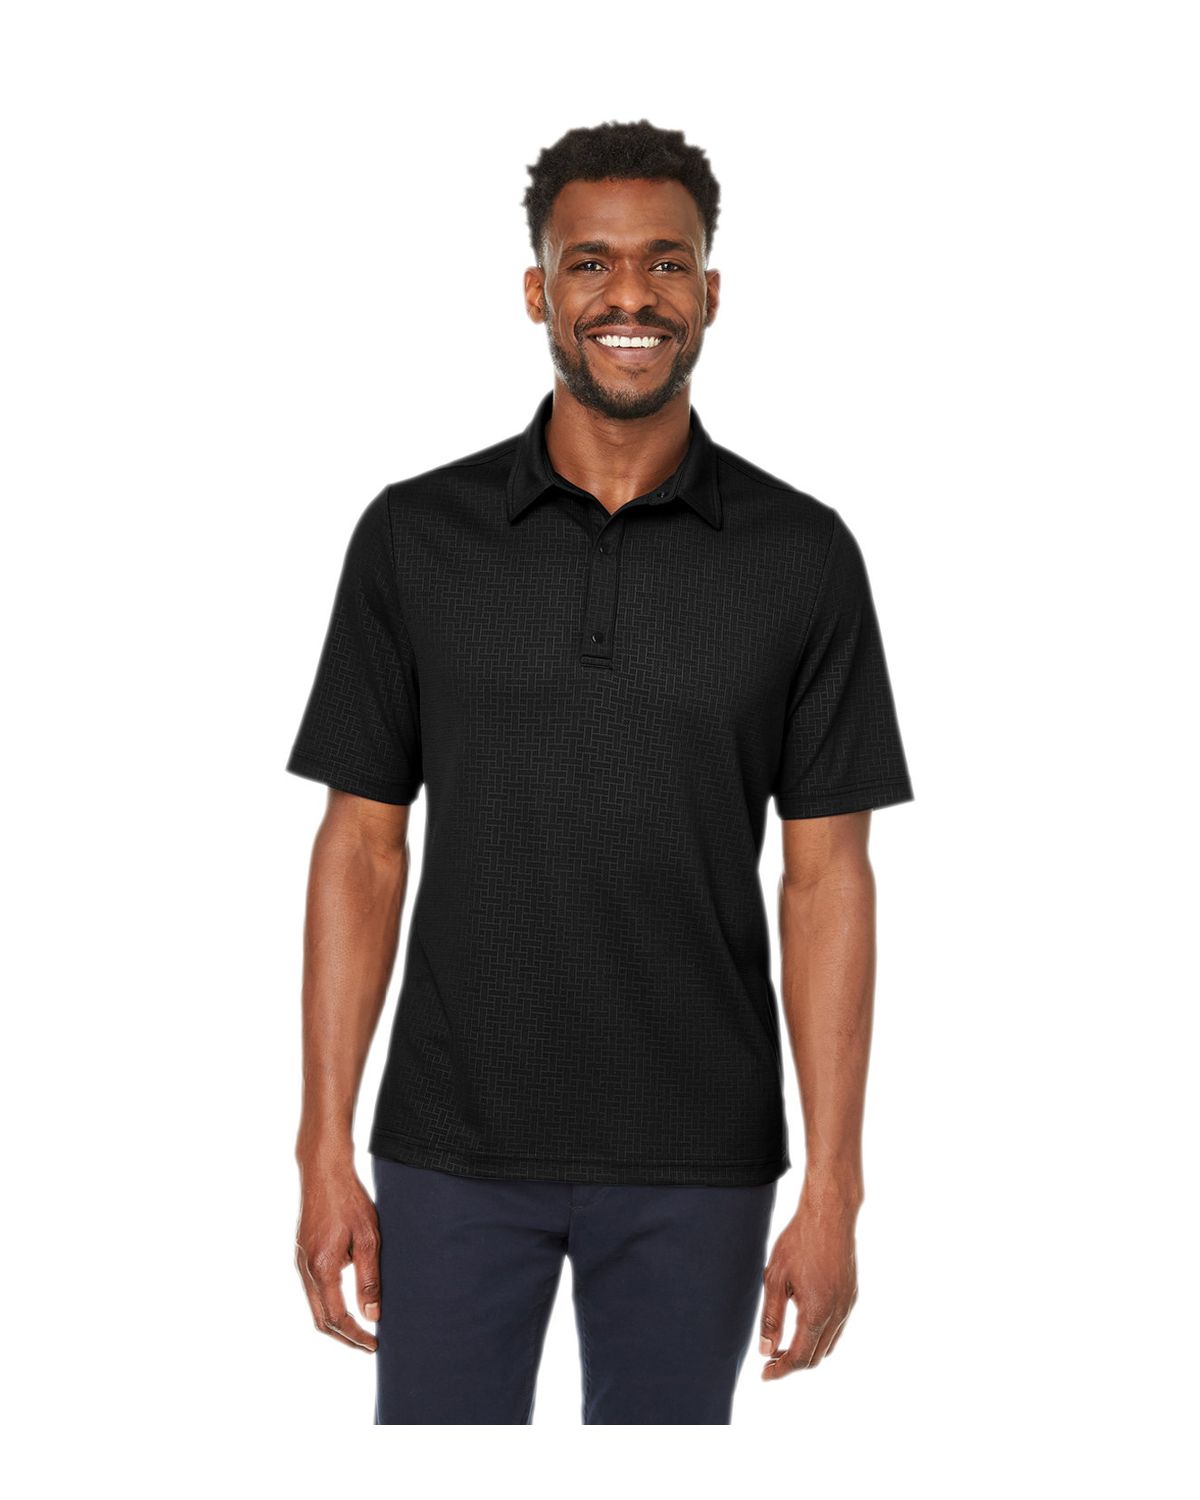 'North End NE102 Men's Replay Recycled Polo'